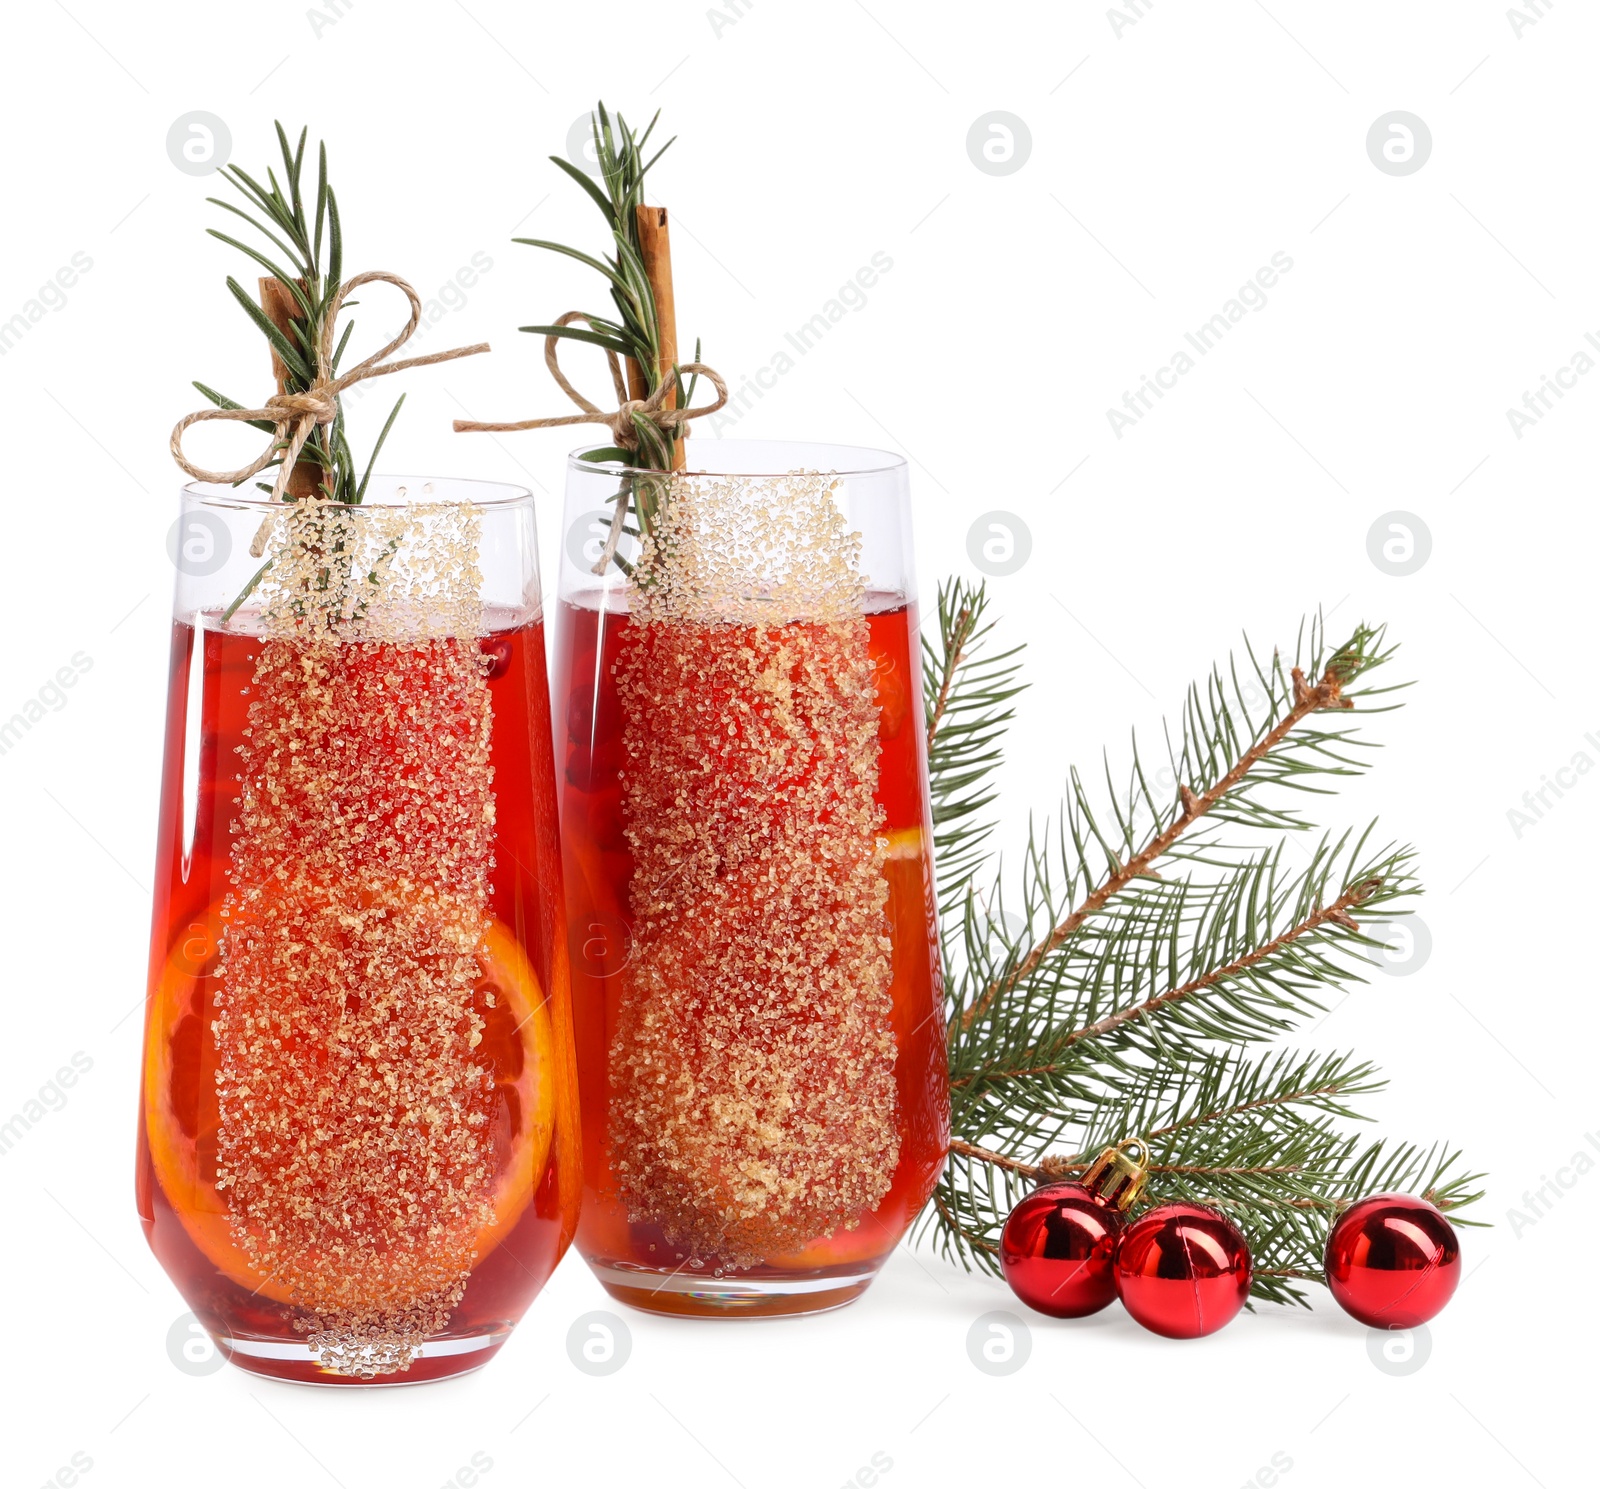 Photo of Christmas Sangria cocktail in glasses and festive decor isolated on white